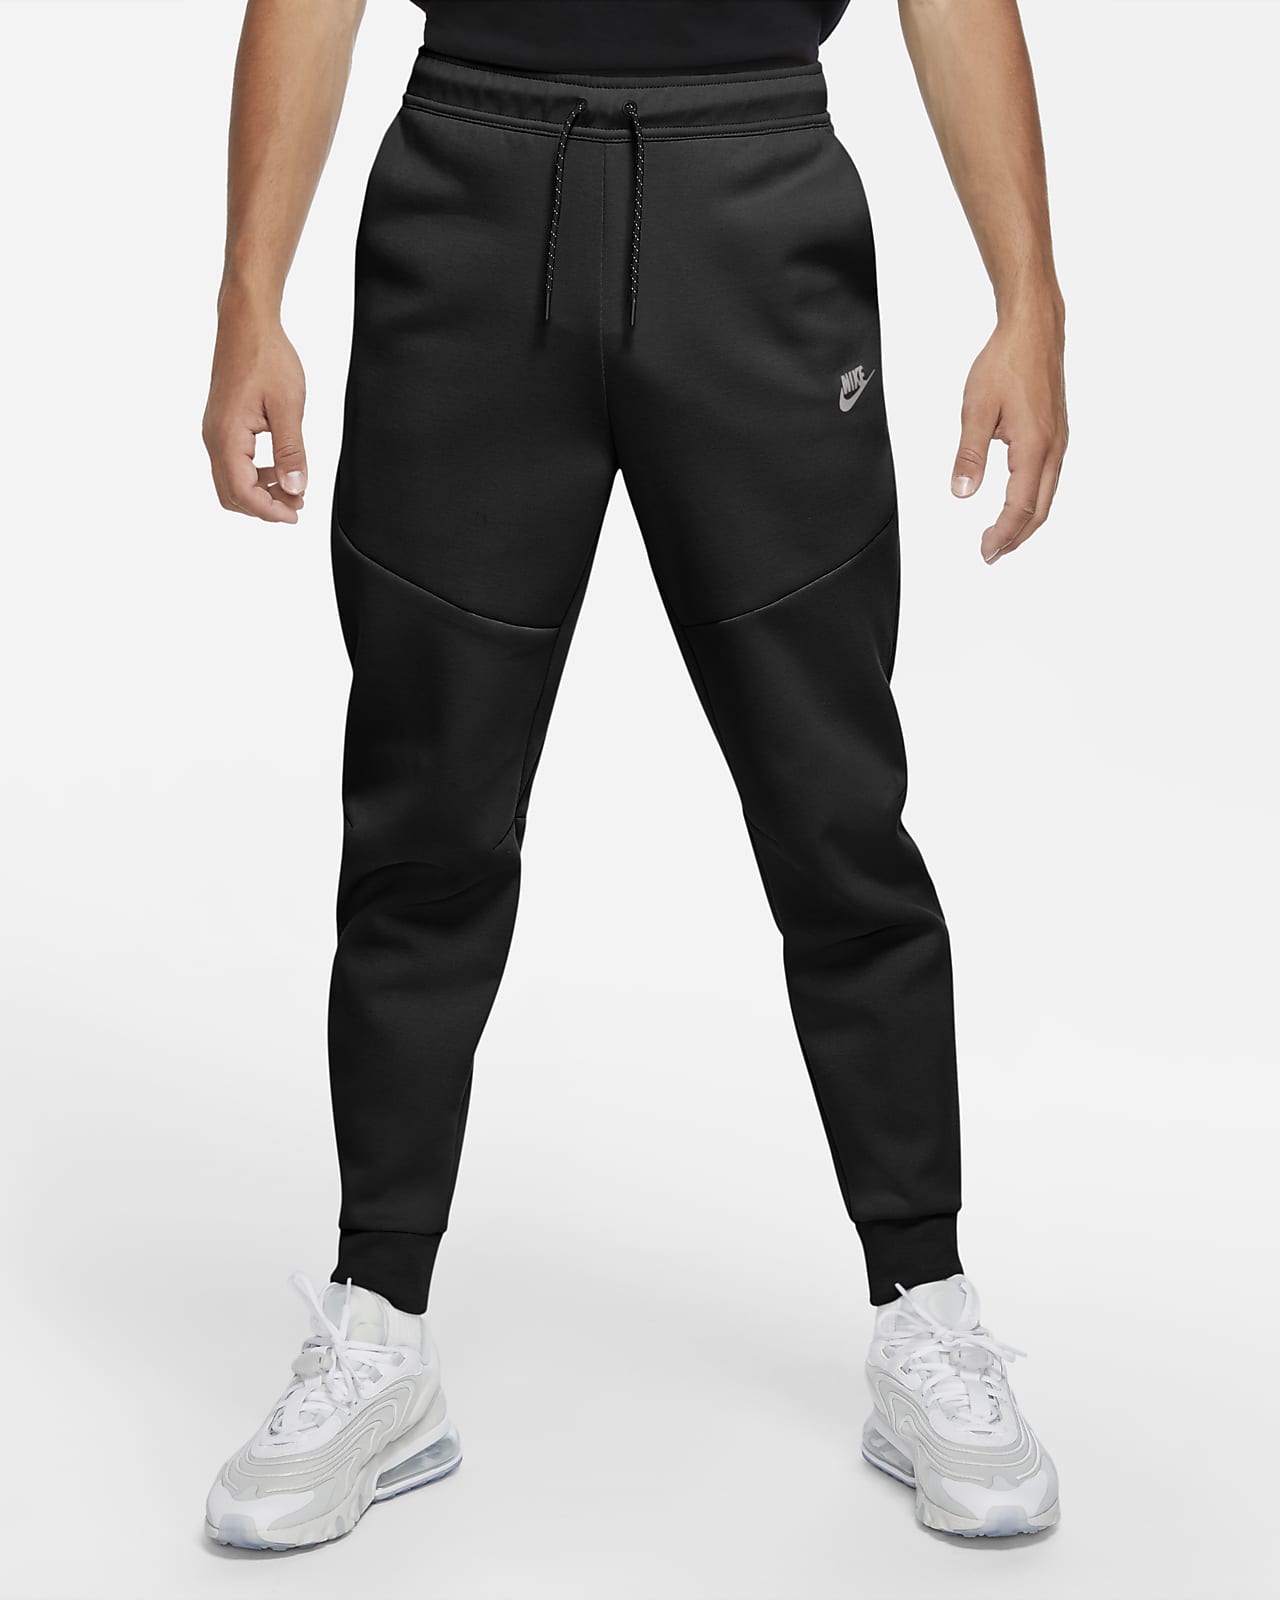 Nike Tech Fleece Joggers Nike tech fleece, Jogger pants outfit women ...